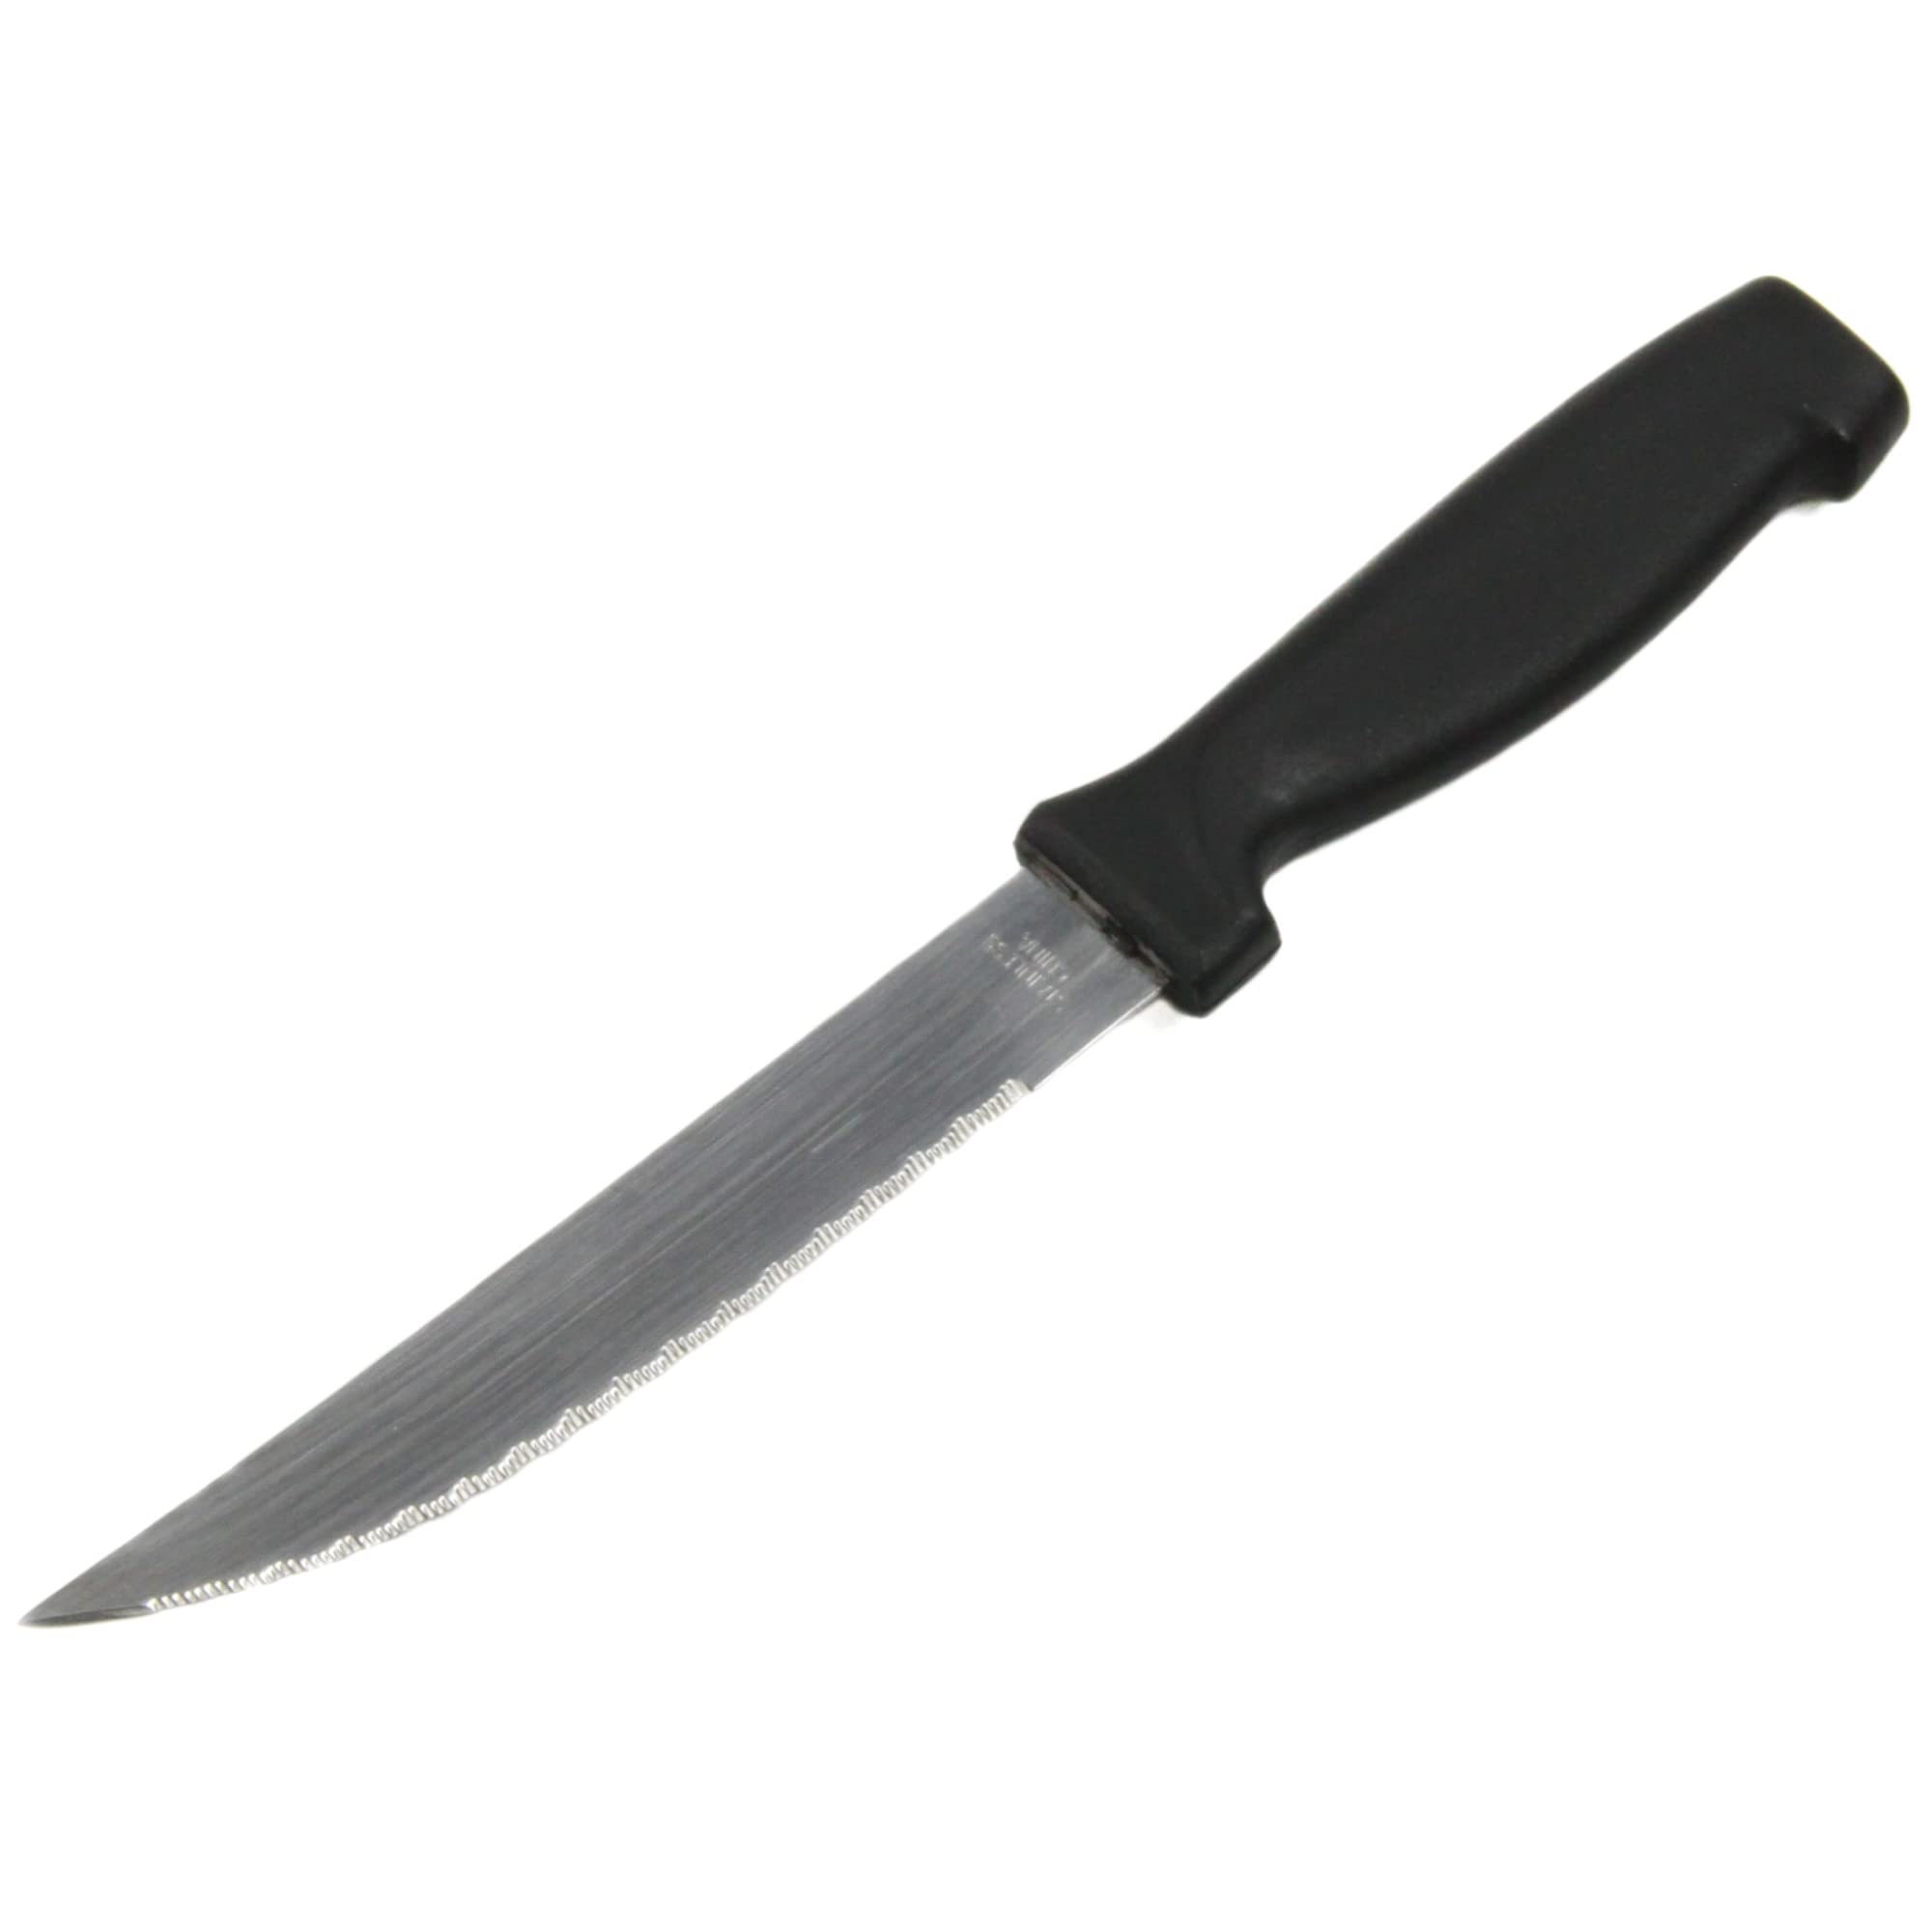 Chef Craft Select Utility Knife, 5 inch Blade 9 inches in Length, Stainless Steel/Black $1.97+ Free Shipping w/ Prime or on $35+